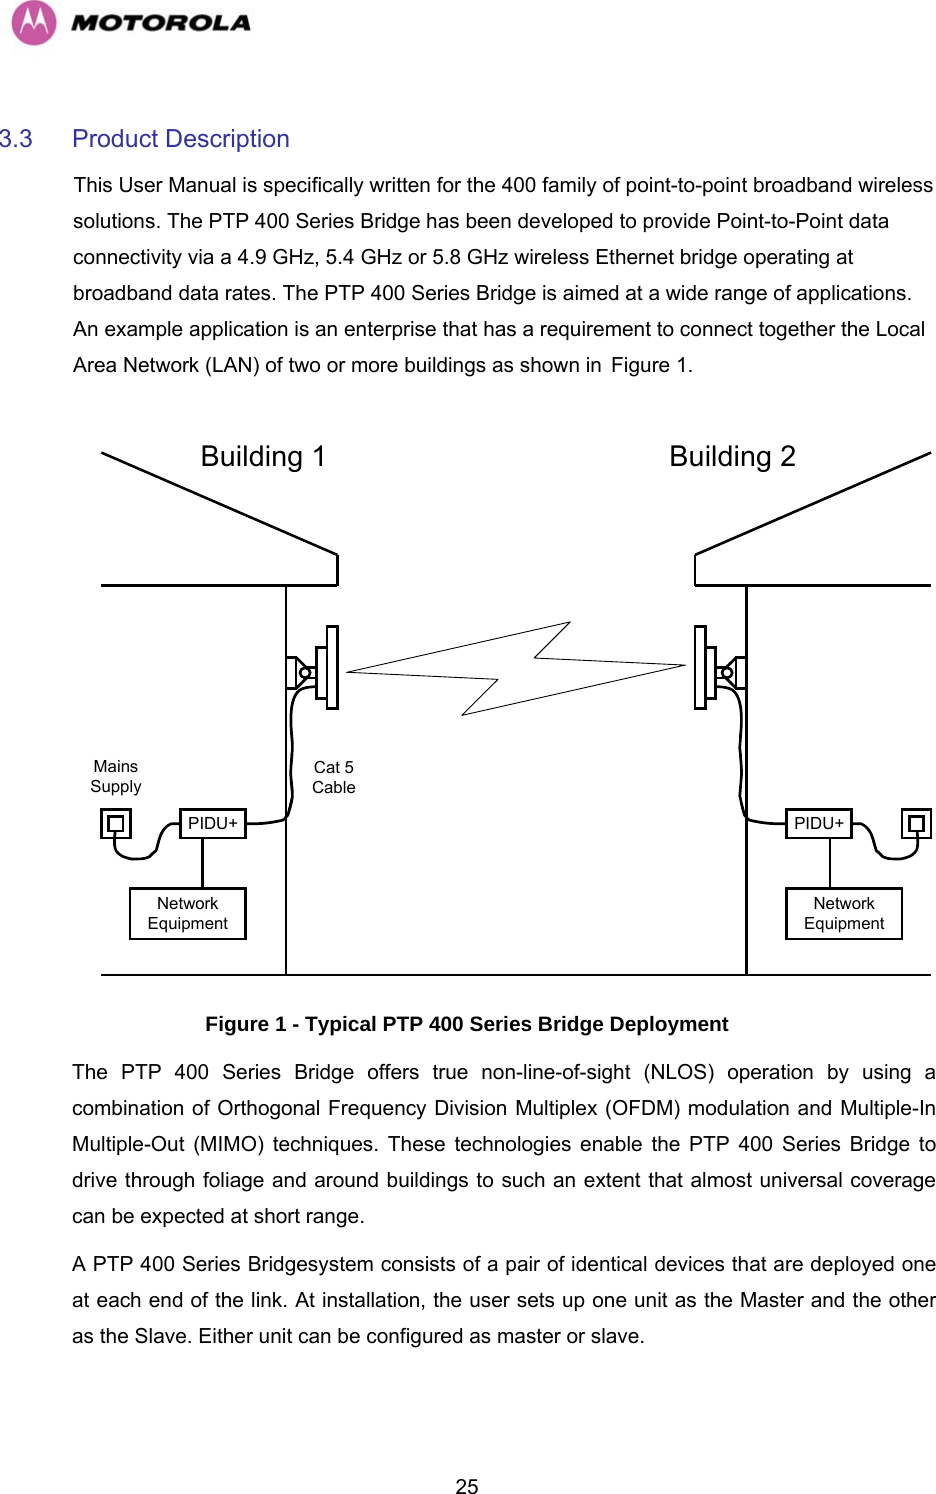   253.3 Product Description  This User Manual is specifically written for the 400 family of point-to-point broadband wireless solutions. The PTP 400 Series Bridge has been developed to provide Point-to-Point data connectivity via a 4.9 GHz, 5.4 GHz or 5.8 GHz wireless Ethernet bridge operating at broadband data rates. The PTP 400 Series Bridge is aimed at a wide range of applications. An example application is an enterprise that has a requirement to connect together the Local Area Network (LAN) of two or more buildings as shown in HFigure 1.   PIDU+NetworkEquipmentPIDU+NetworkEquipmentMainsSupplyCat 5CableBuilding 1 Building 2 Figure 1 - Typical PTP 400 Series Bridge Deployment The PTP 400 Series Bridge offers true non-line-of-sight (NLOS) operation by using a combination of Orthogonal Frequency Division Multiplex (OFDM) modulation and Multiple-In Multiple-Out (MIMO) techniques. These technologies enable the PTP 400 Series Bridge to drive through foliage and around buildings to such an extent that almost universal coverage can be expected at short range.  A PTP 400 Series Bridgesystem consists of a pair of identical devices that are deployed one at each end of the link. At installation, the user sets up one unit as the Master and the other as the Slave. Either unit can be configured as master or slave.  